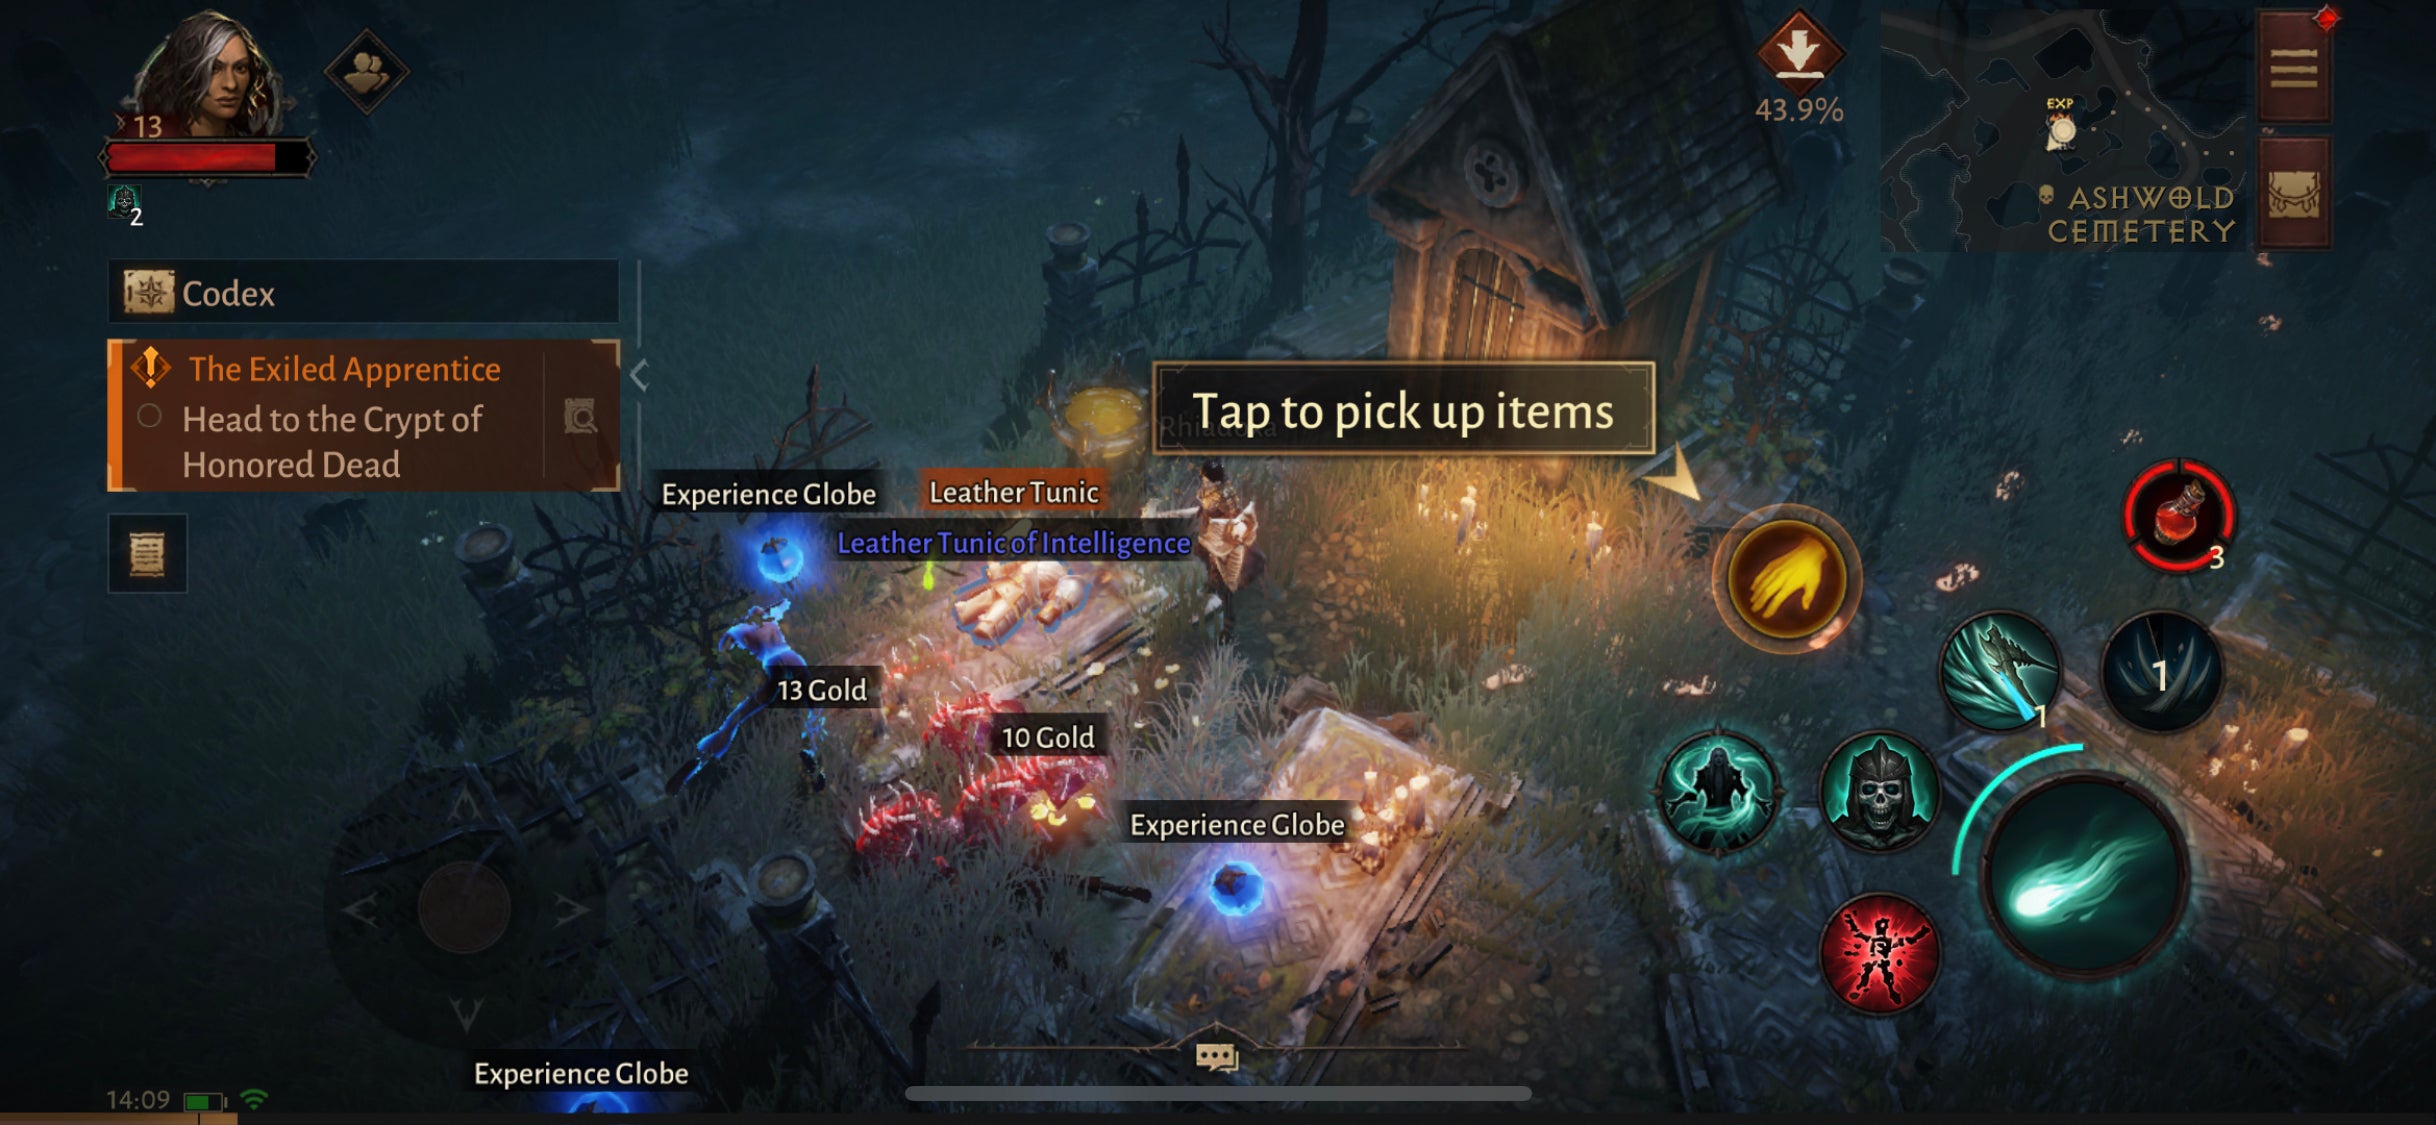 Experience Globes dropped by Blue Skull enemies litter the ground in Diablo Immortal